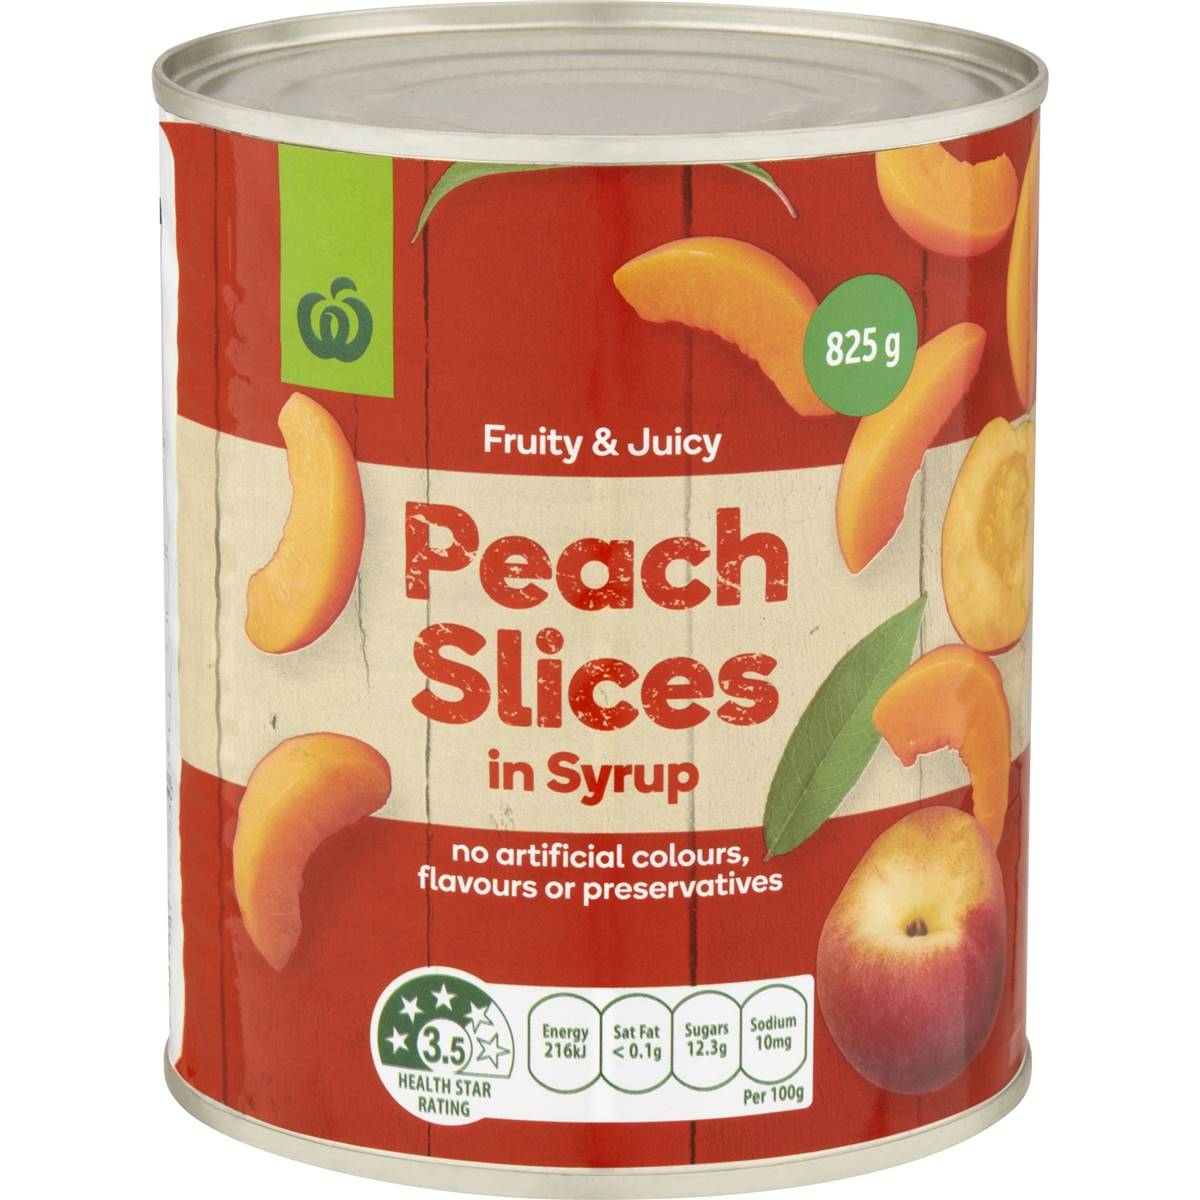 Calories in Woolworths Peach Slices In Syrup